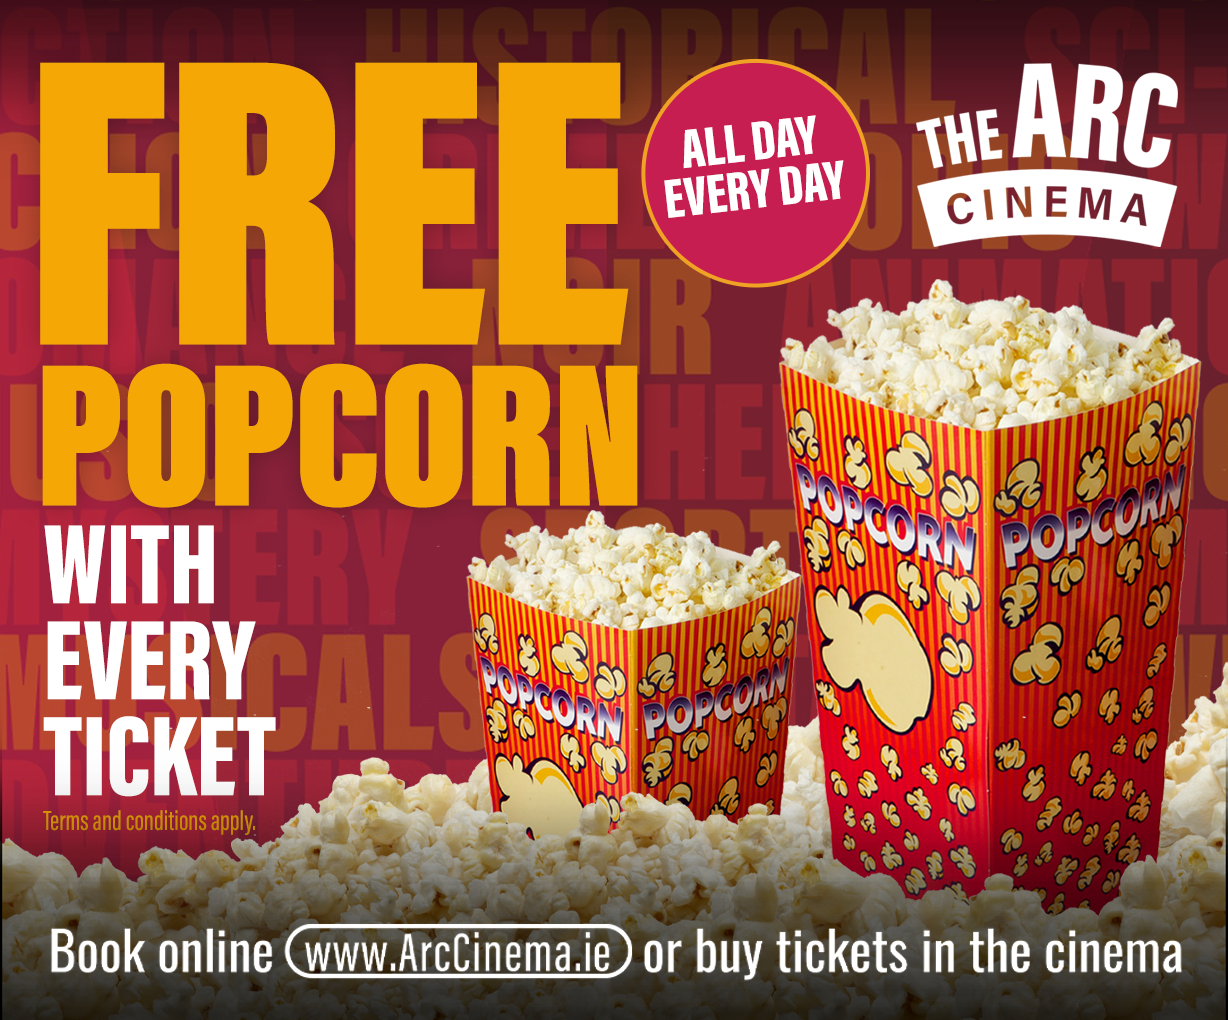 FREE POPCORN WITH EVERY TICKET